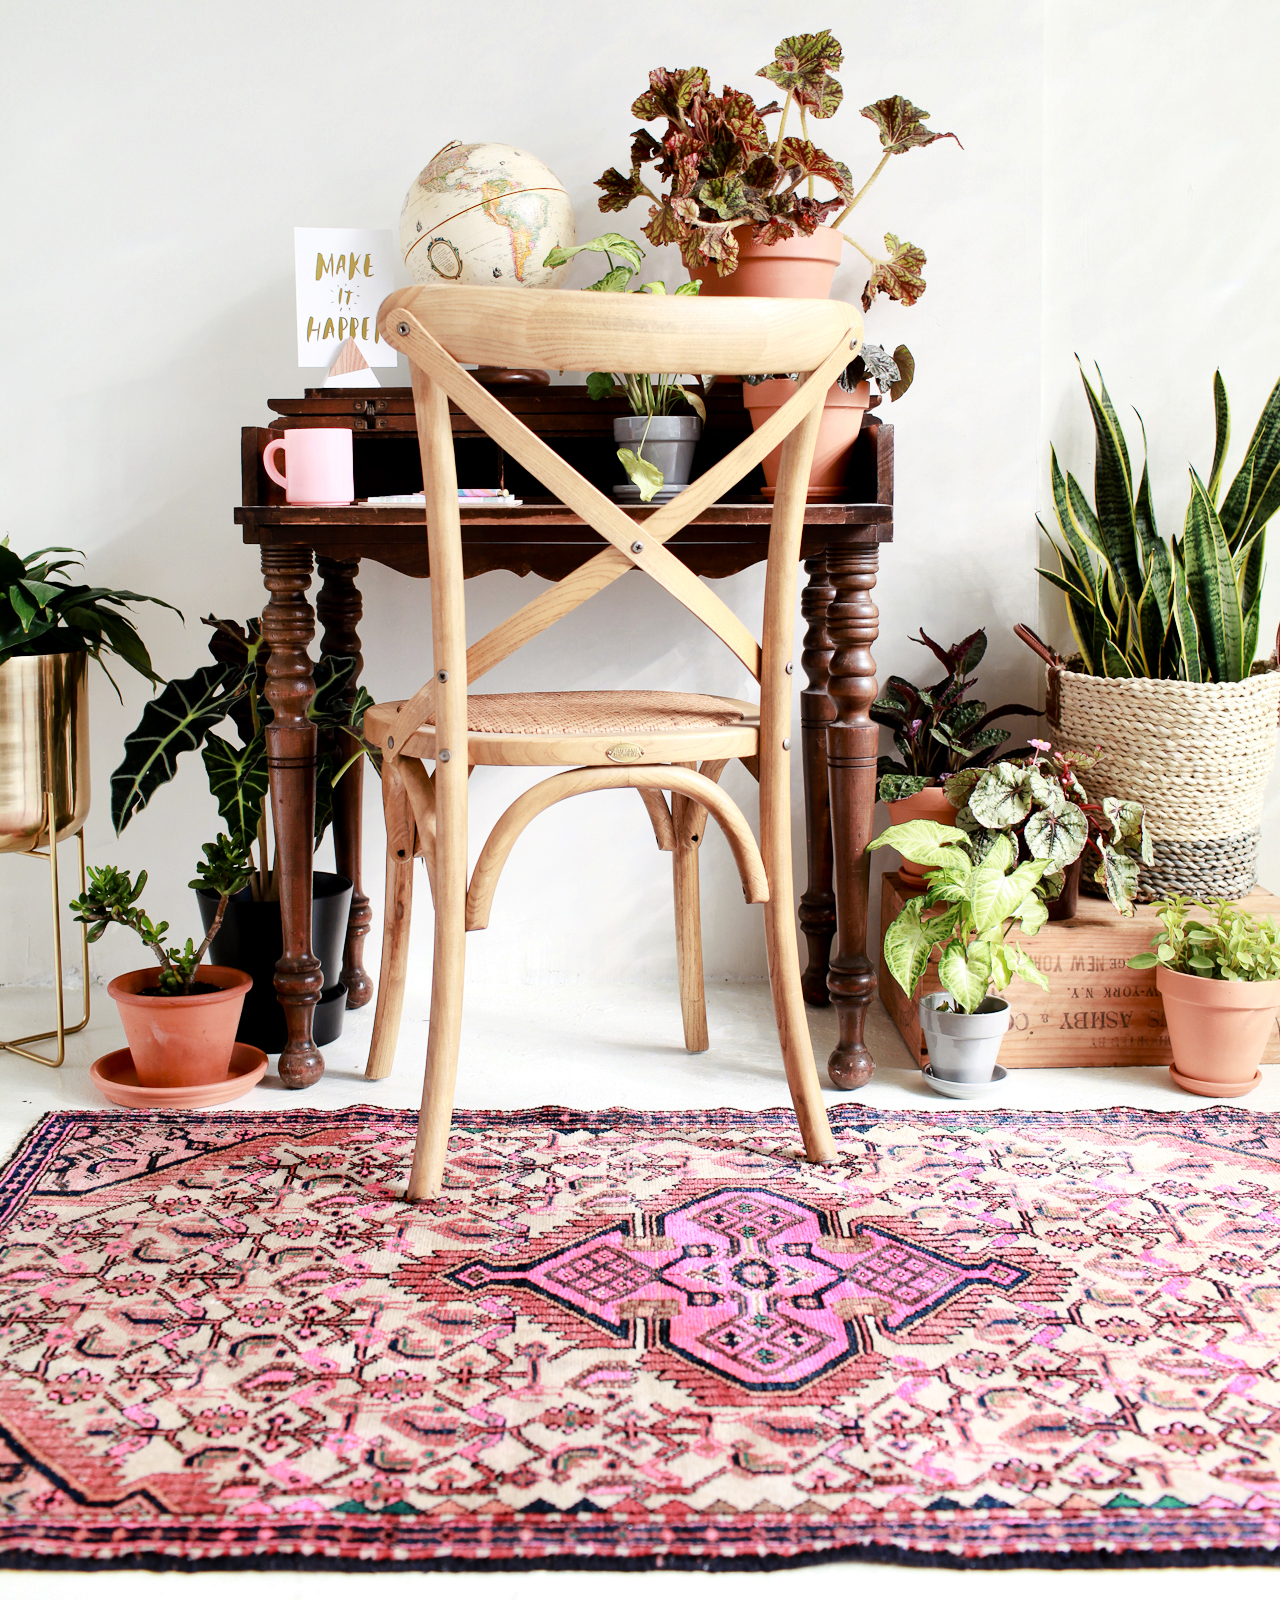 How to Find the Perfect Vintage Rug from eBay